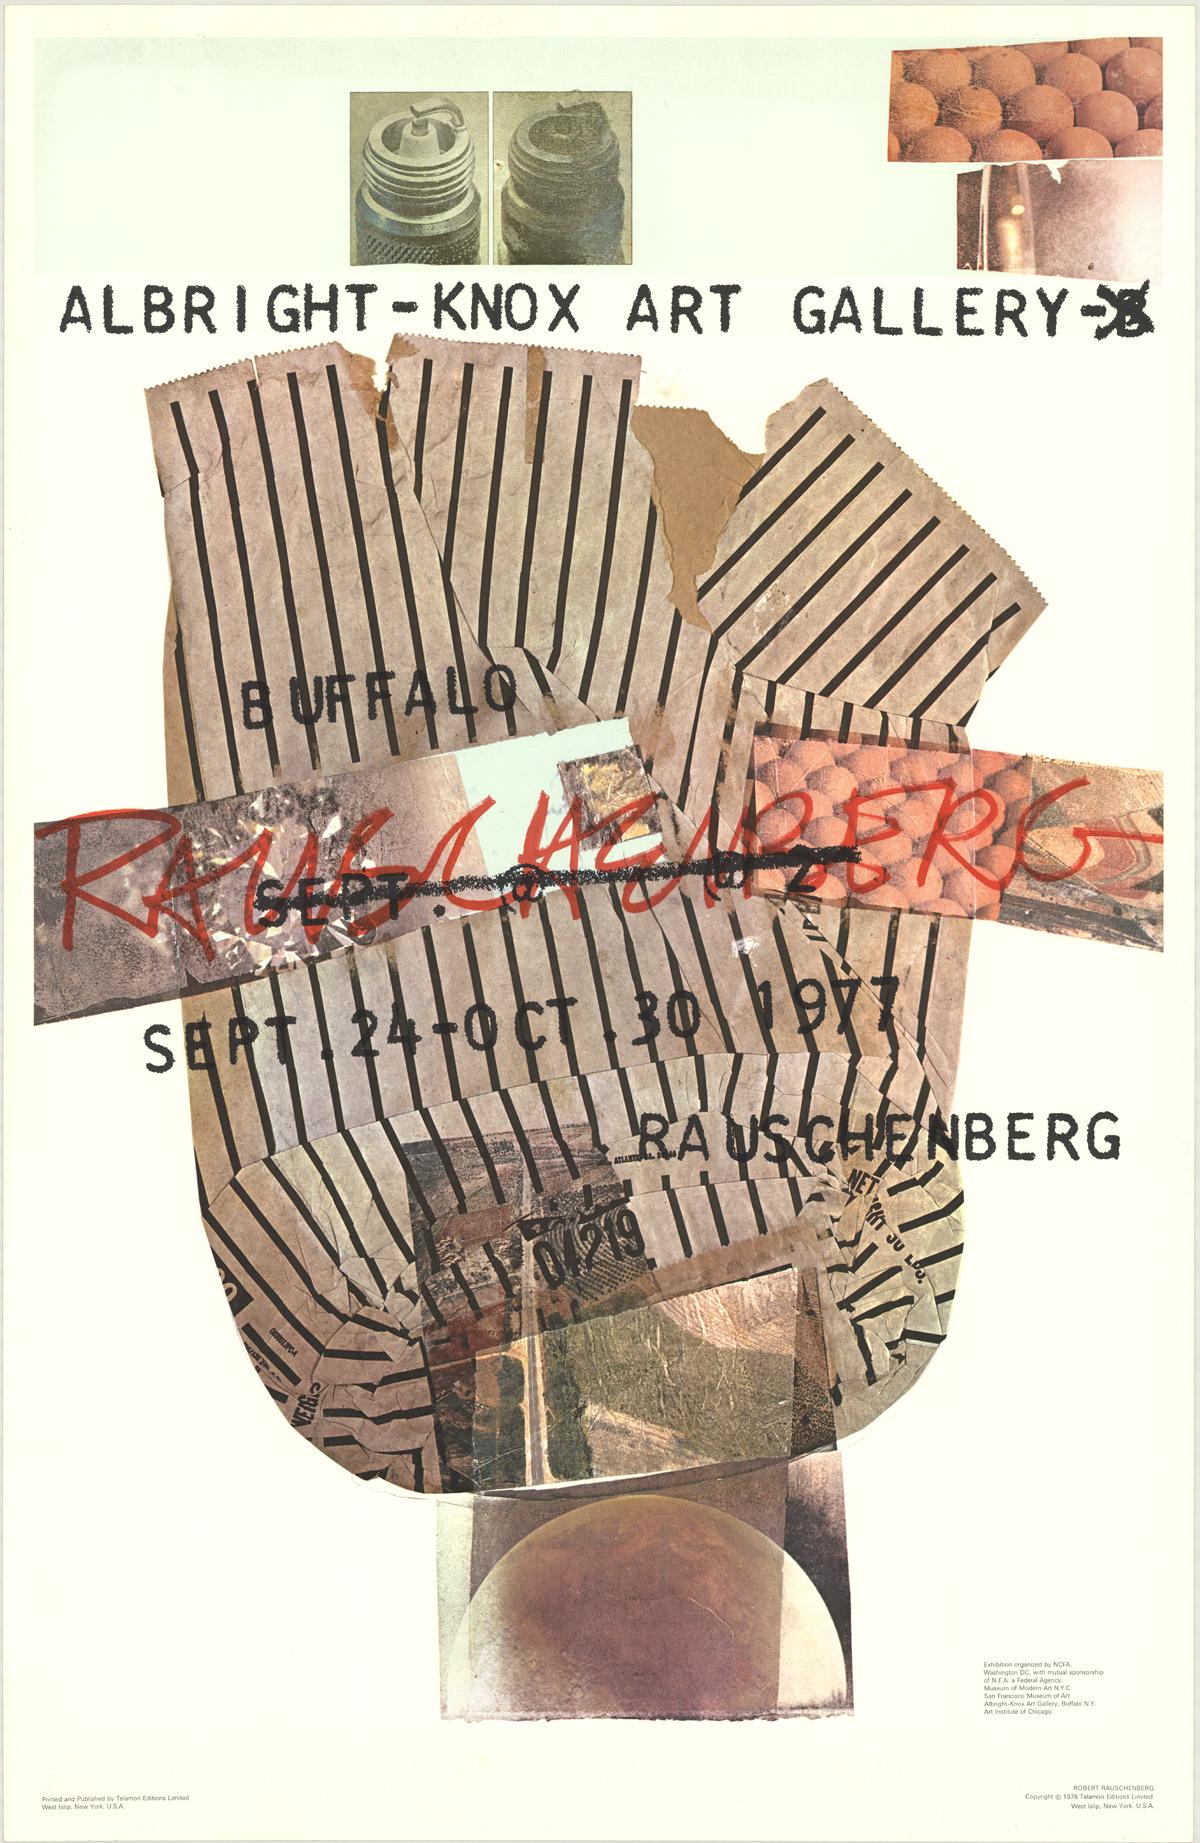 First edition exhibition poster for a retrospective of Rauschenberg's works organized by NCFA, Washington DC, with mutual sponsorship of N.E.A. a Federal Agency, Museum of Modern Art N.Y.C., San Francisco Museum of Art, Albright-Knox Art Gallery,